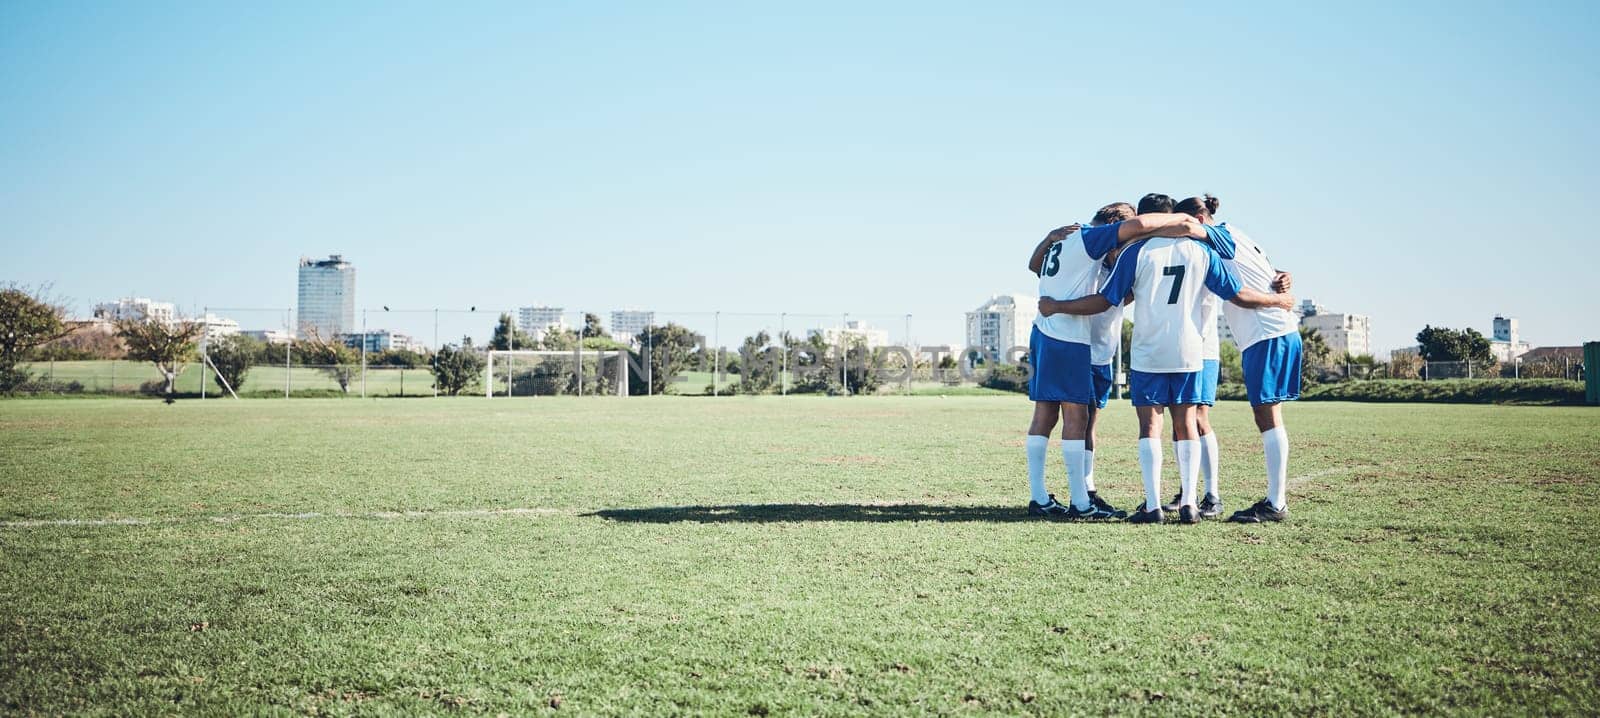 Sports, mockup and a team of soccer players in a huddle on a field for motivation before a game. Football, fitness and training with man friends getting ready for competition on a pitch together.